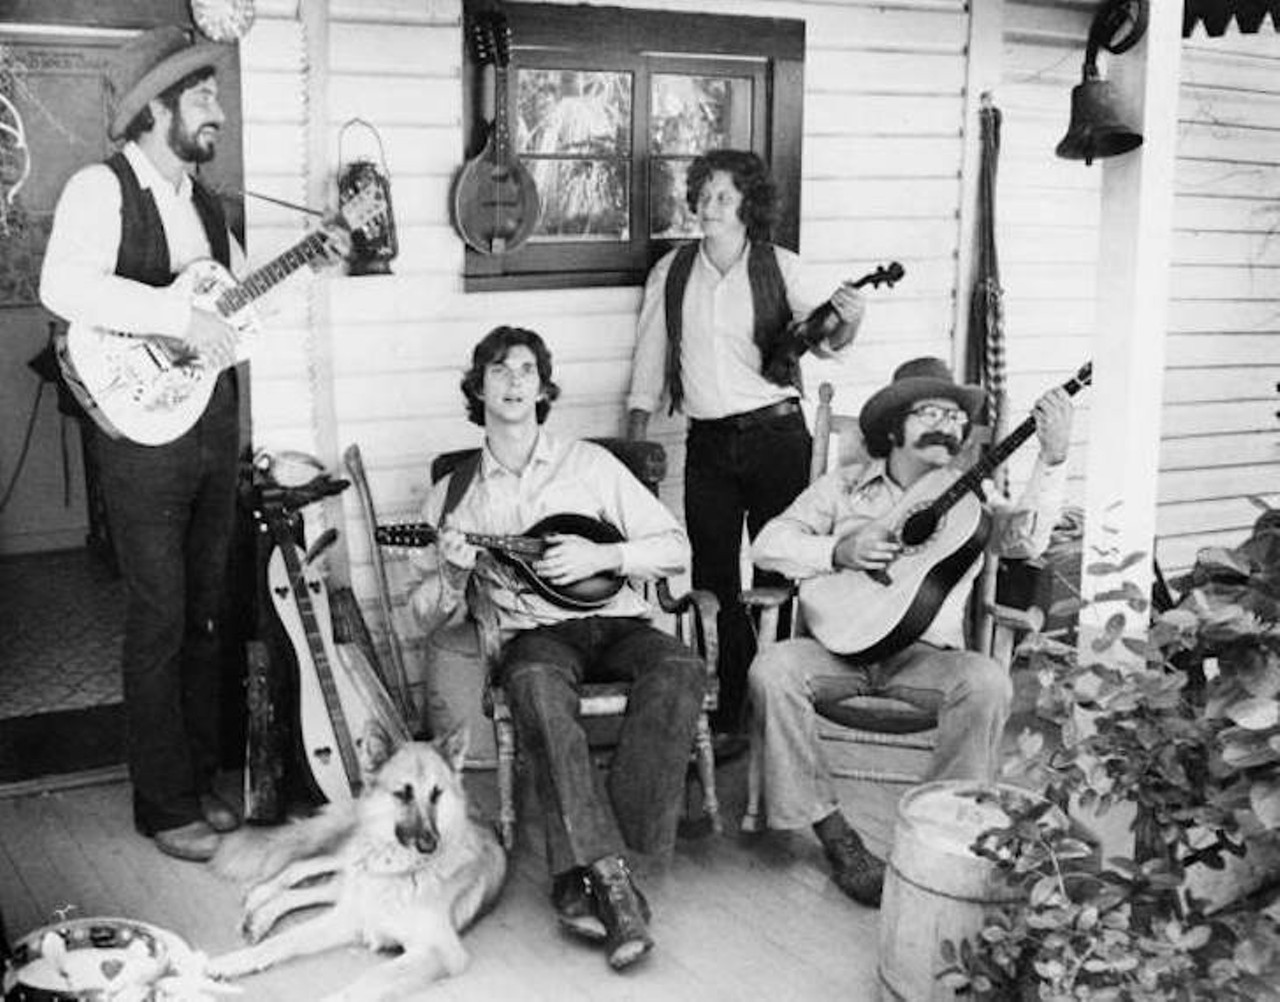 "The Back Porch Boys" of Stuart, Florida, photographed in 1979.